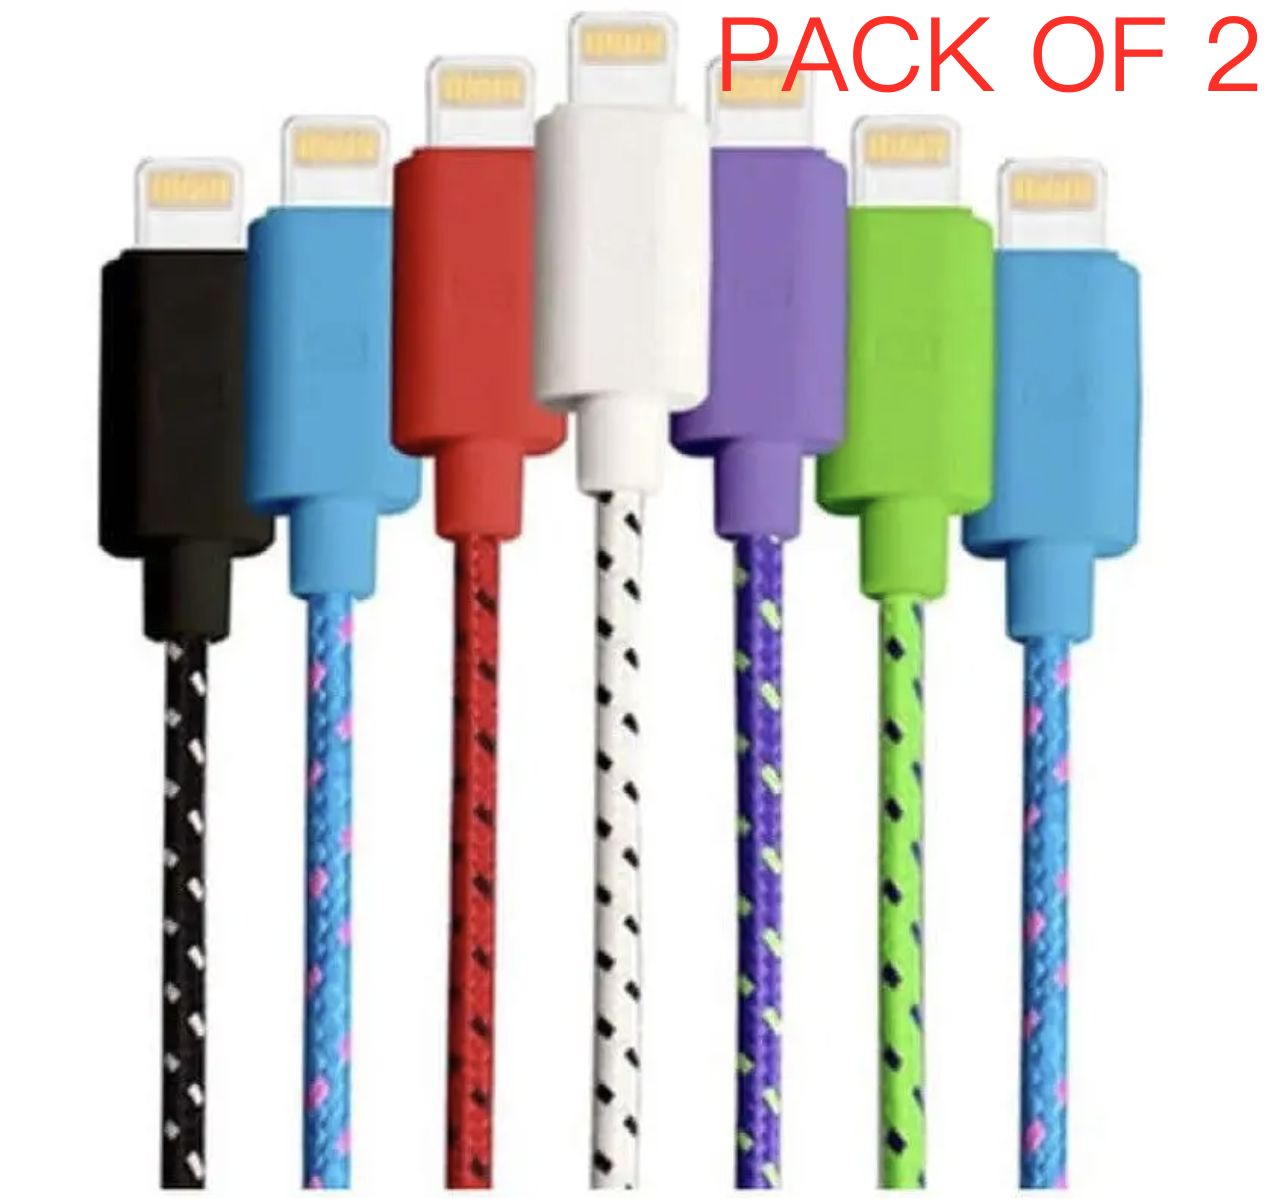 Pack of 2 Iphone Ipad braided USB charger